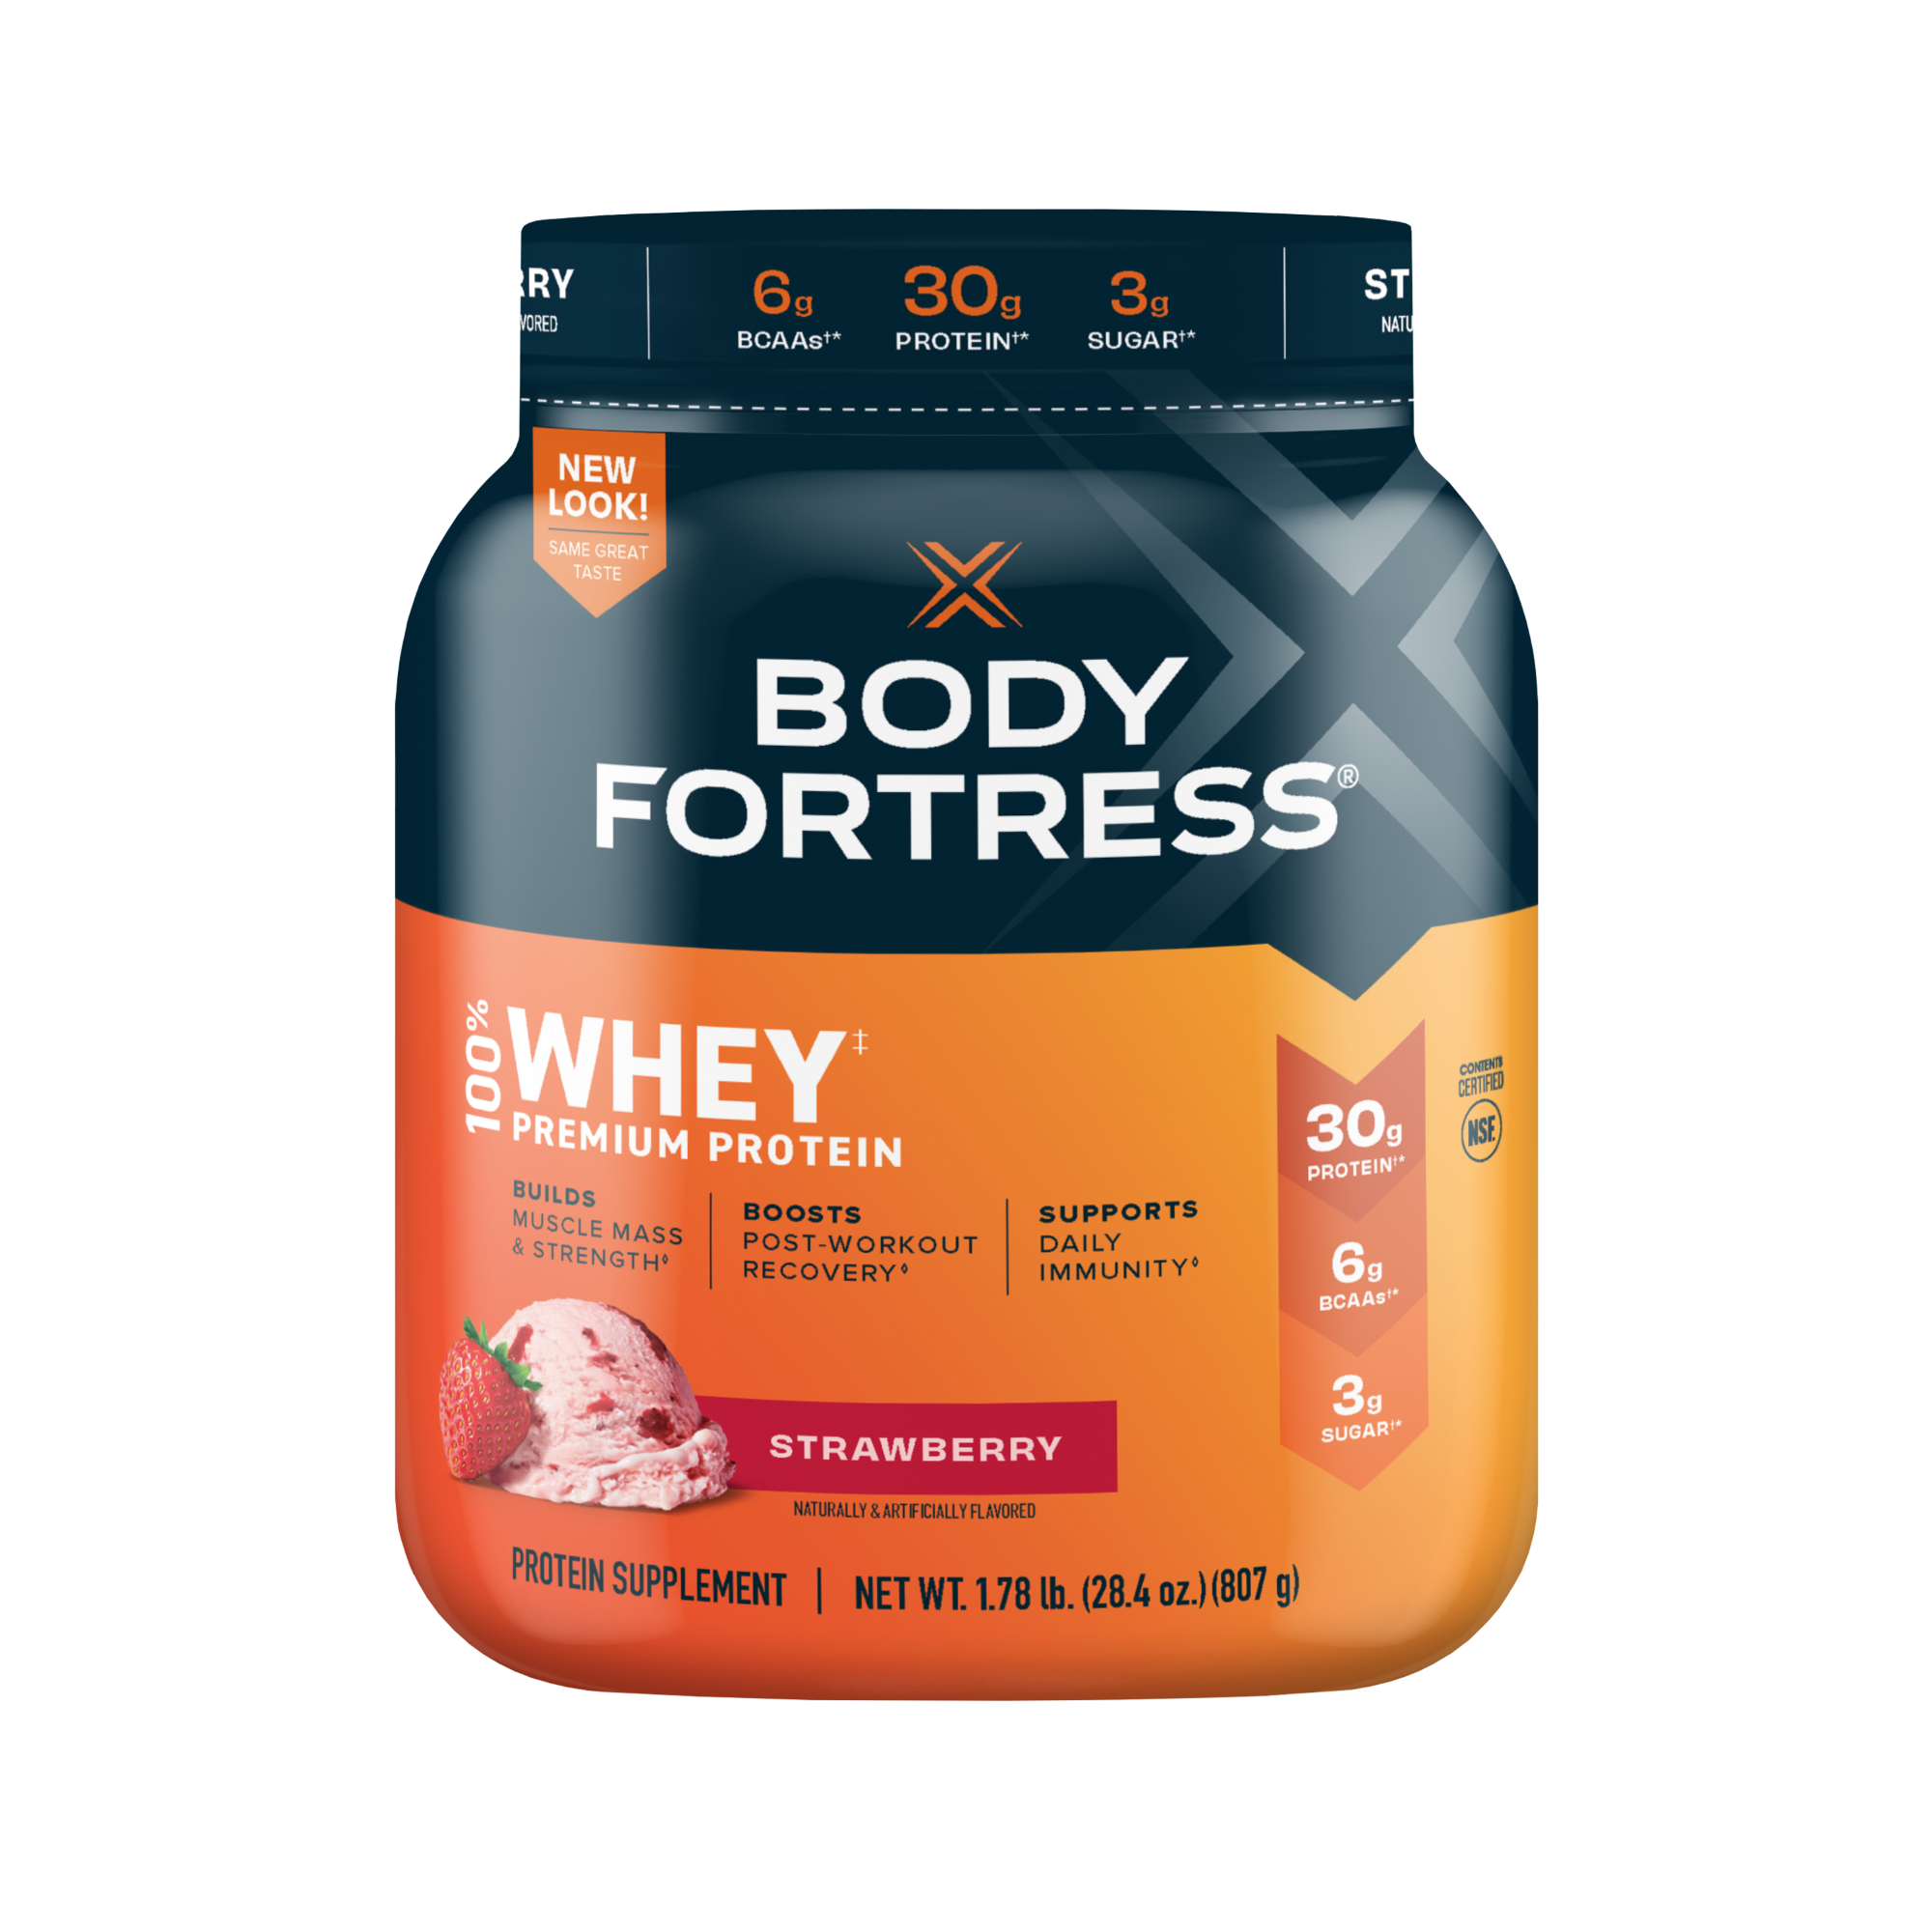 Body Fortress 100% Whey, Premium Protein Powder, Strawberry, 1.78lbs (Packaging May Vary) - image 1 of 8